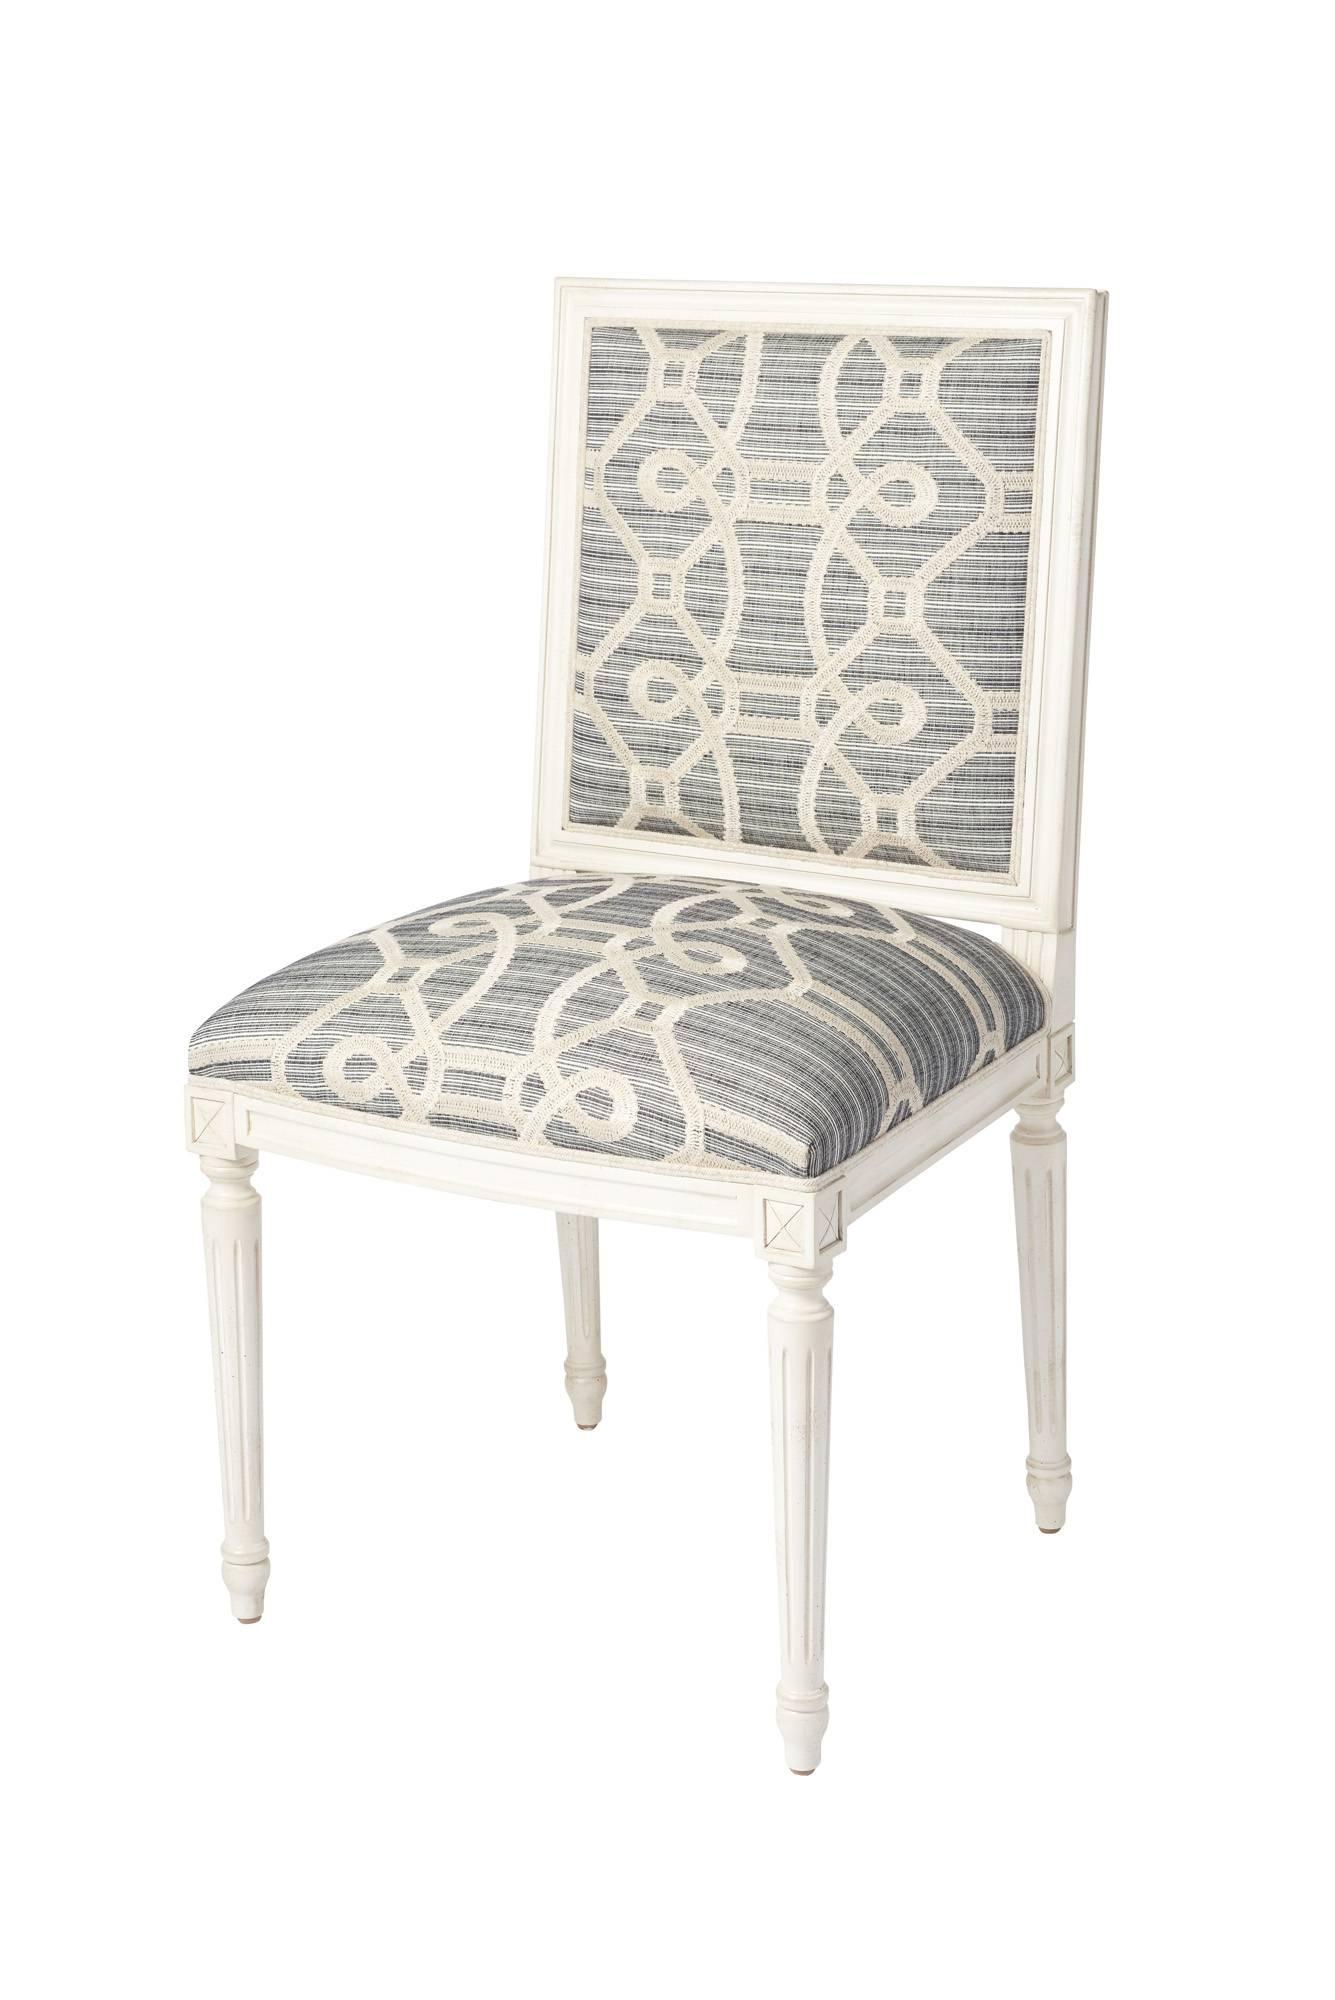 The Marie Therese side chair is a classic, timeless silhouette that features a hand-carved European beechwood frame. This chair is upholstered in Schumacher Ziz Embroidery. With an intentionally irregular strié ground and a fanciful updated trellis